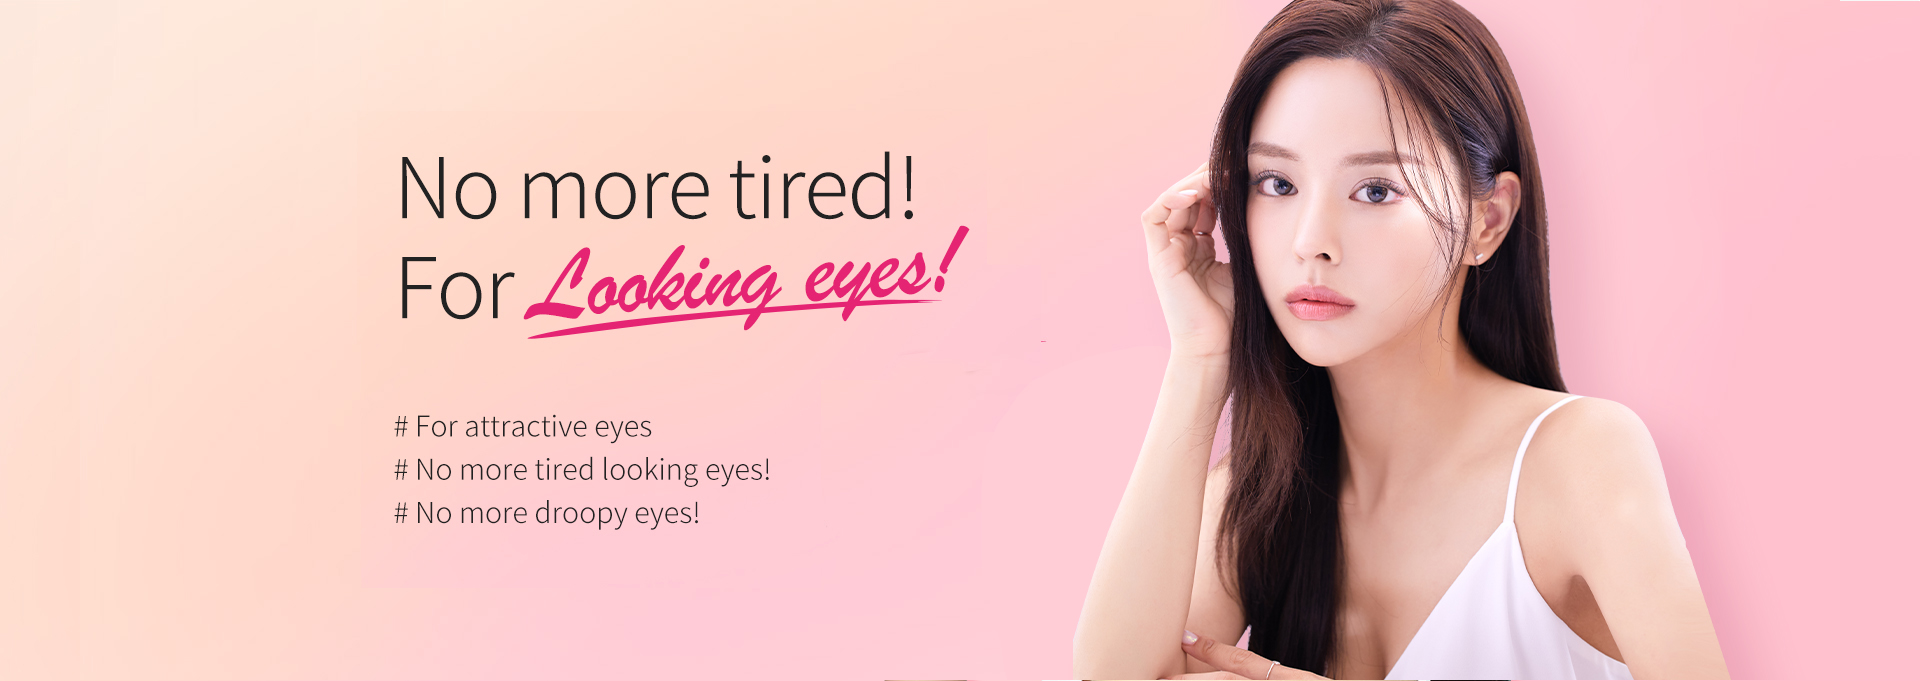 No more tired! For Looking eyes!